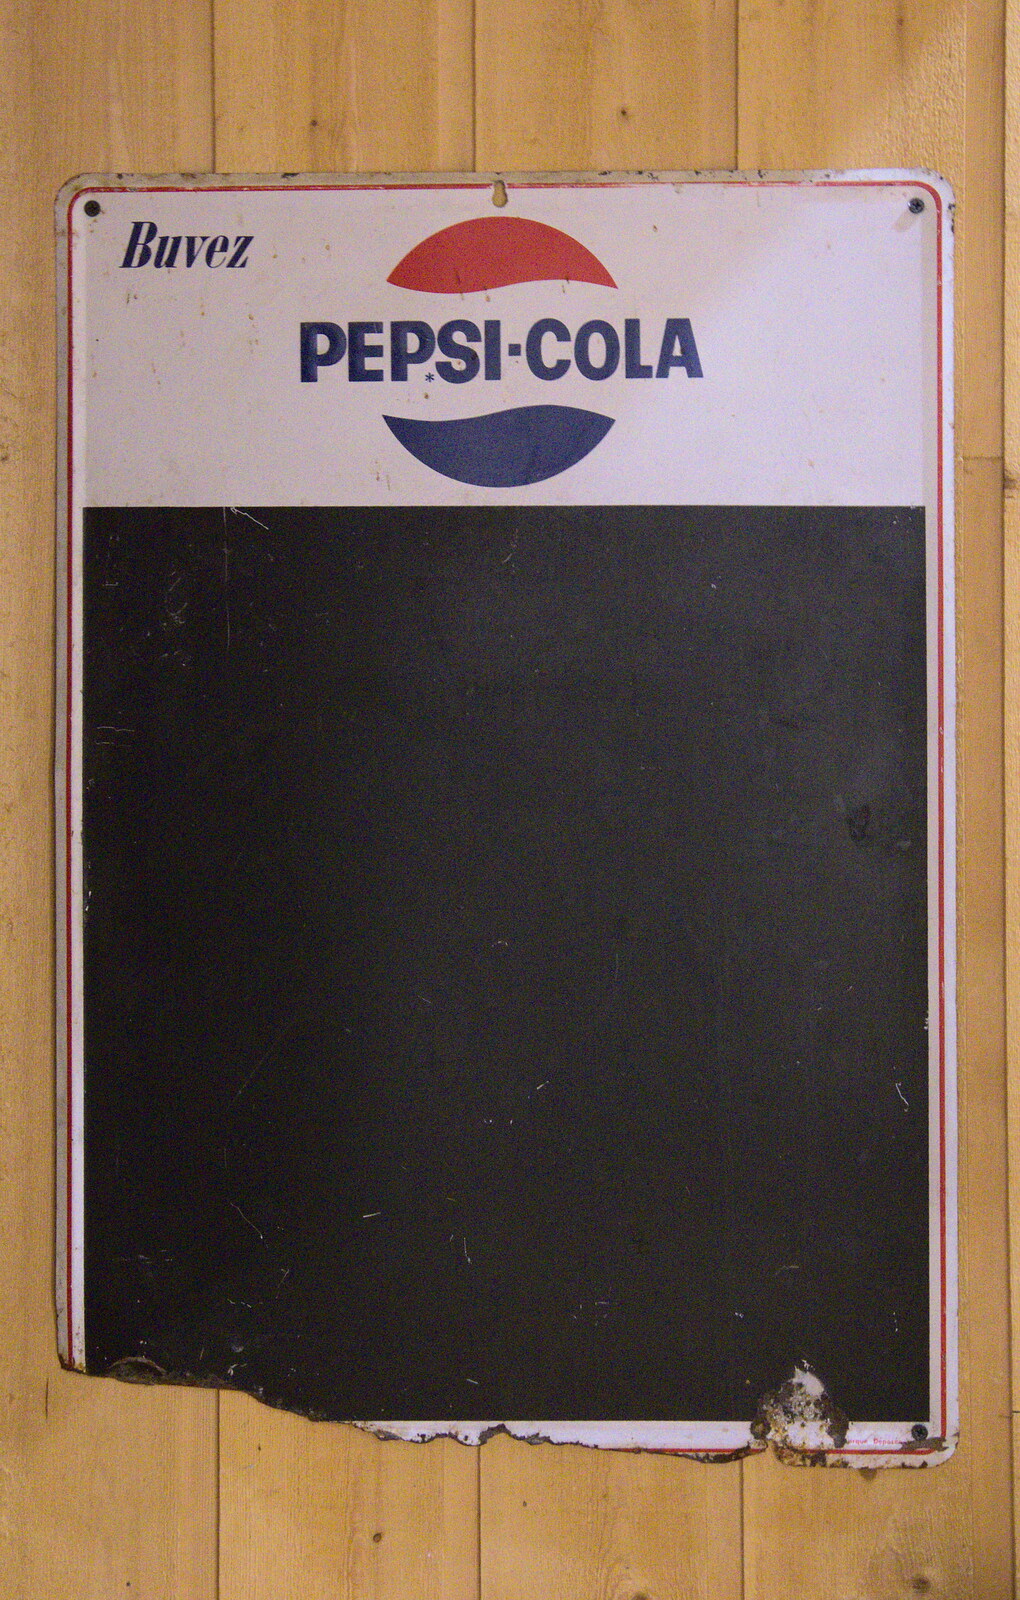 An old, broken, Pepsi noticeboard from Le Gouffre Géant and Grotte de Limousis, Petanque and a Lightning Storm, Languedoc, France - 12th August 2018